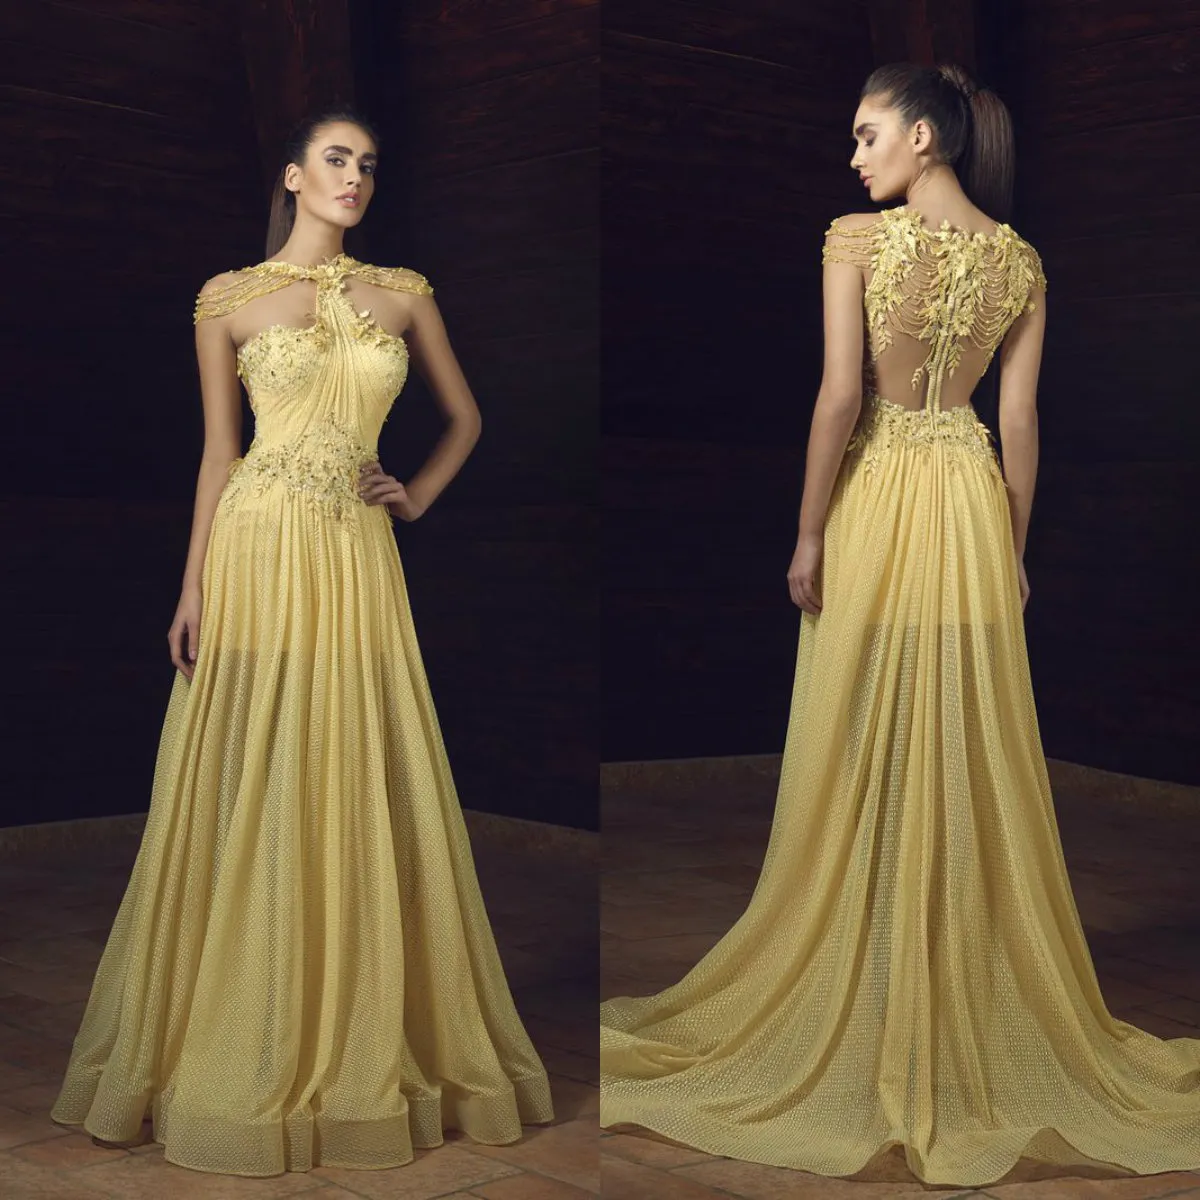 Elegant A Line Light Yellow Prom Dresses Jewel Lace Applique Beads Designer Evening Dress with Ruffles Sexy Bridal Gowns